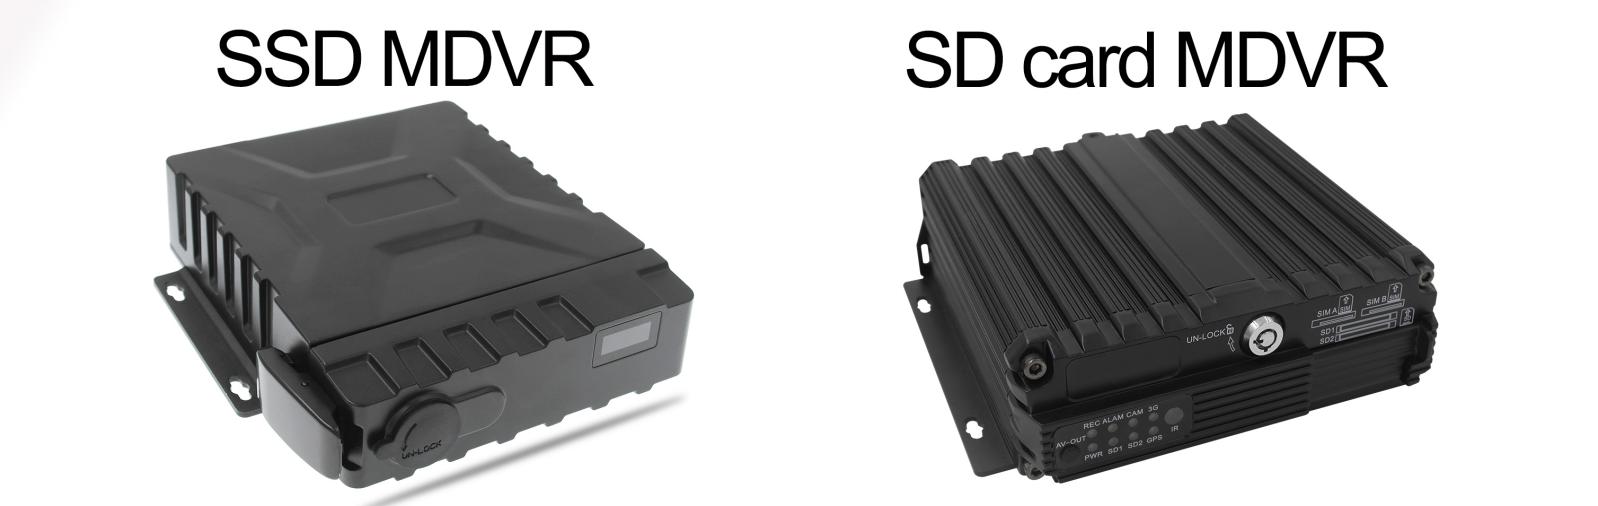 The differences between SD card and HDD in terms of MDVR applications Picture6